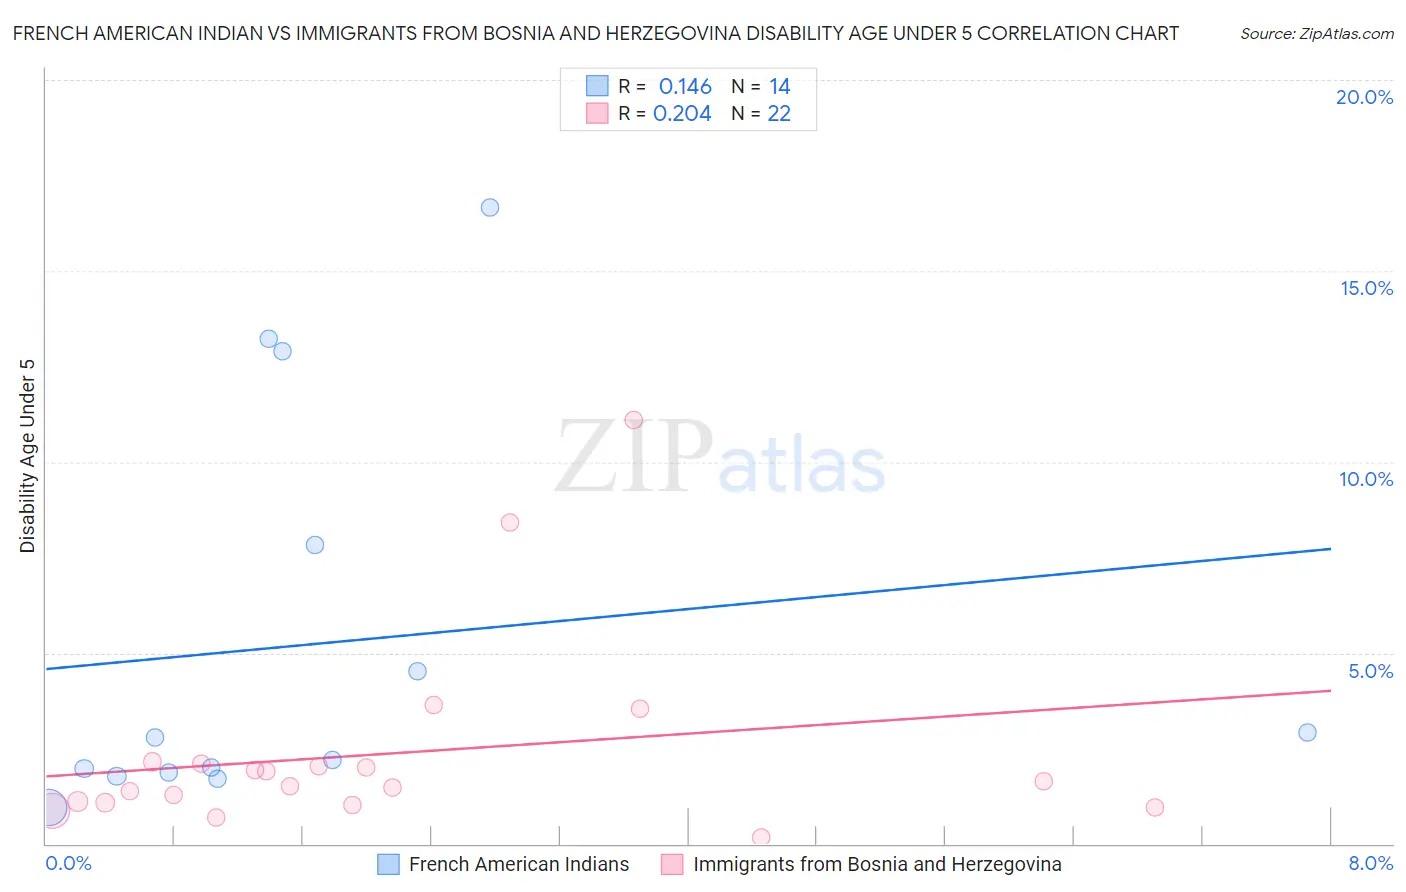 French American Indian vs Immigrants from Bosnia and Herzegovina Disability Age Under 5